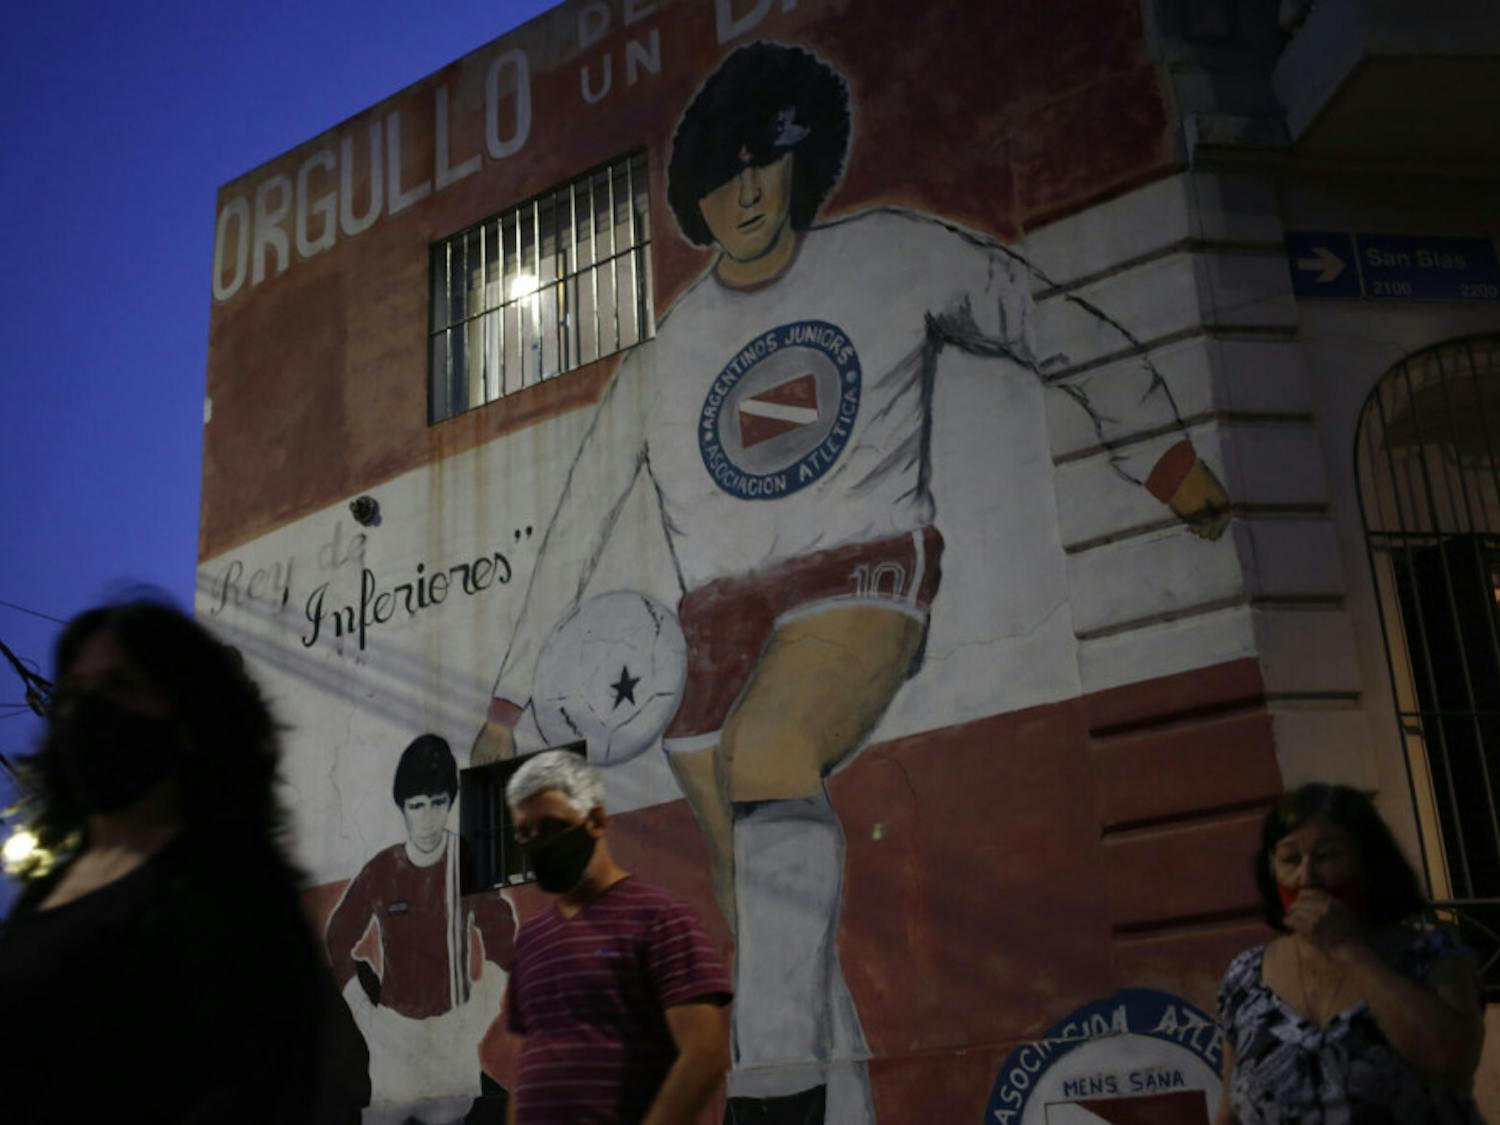 People walk past a mural of Diego Maradona outside the stadium of Argentinos Juniors soccer club, where he started as a professional footballer, in Buenos Aires, Argentina, Wednesday, Nov. 25, 2020. The Argentine soccer great who was among the best players ever and who led his country to the 1986 World Cup title died from a heart attack at his home in Buenos Aires. He was 60.